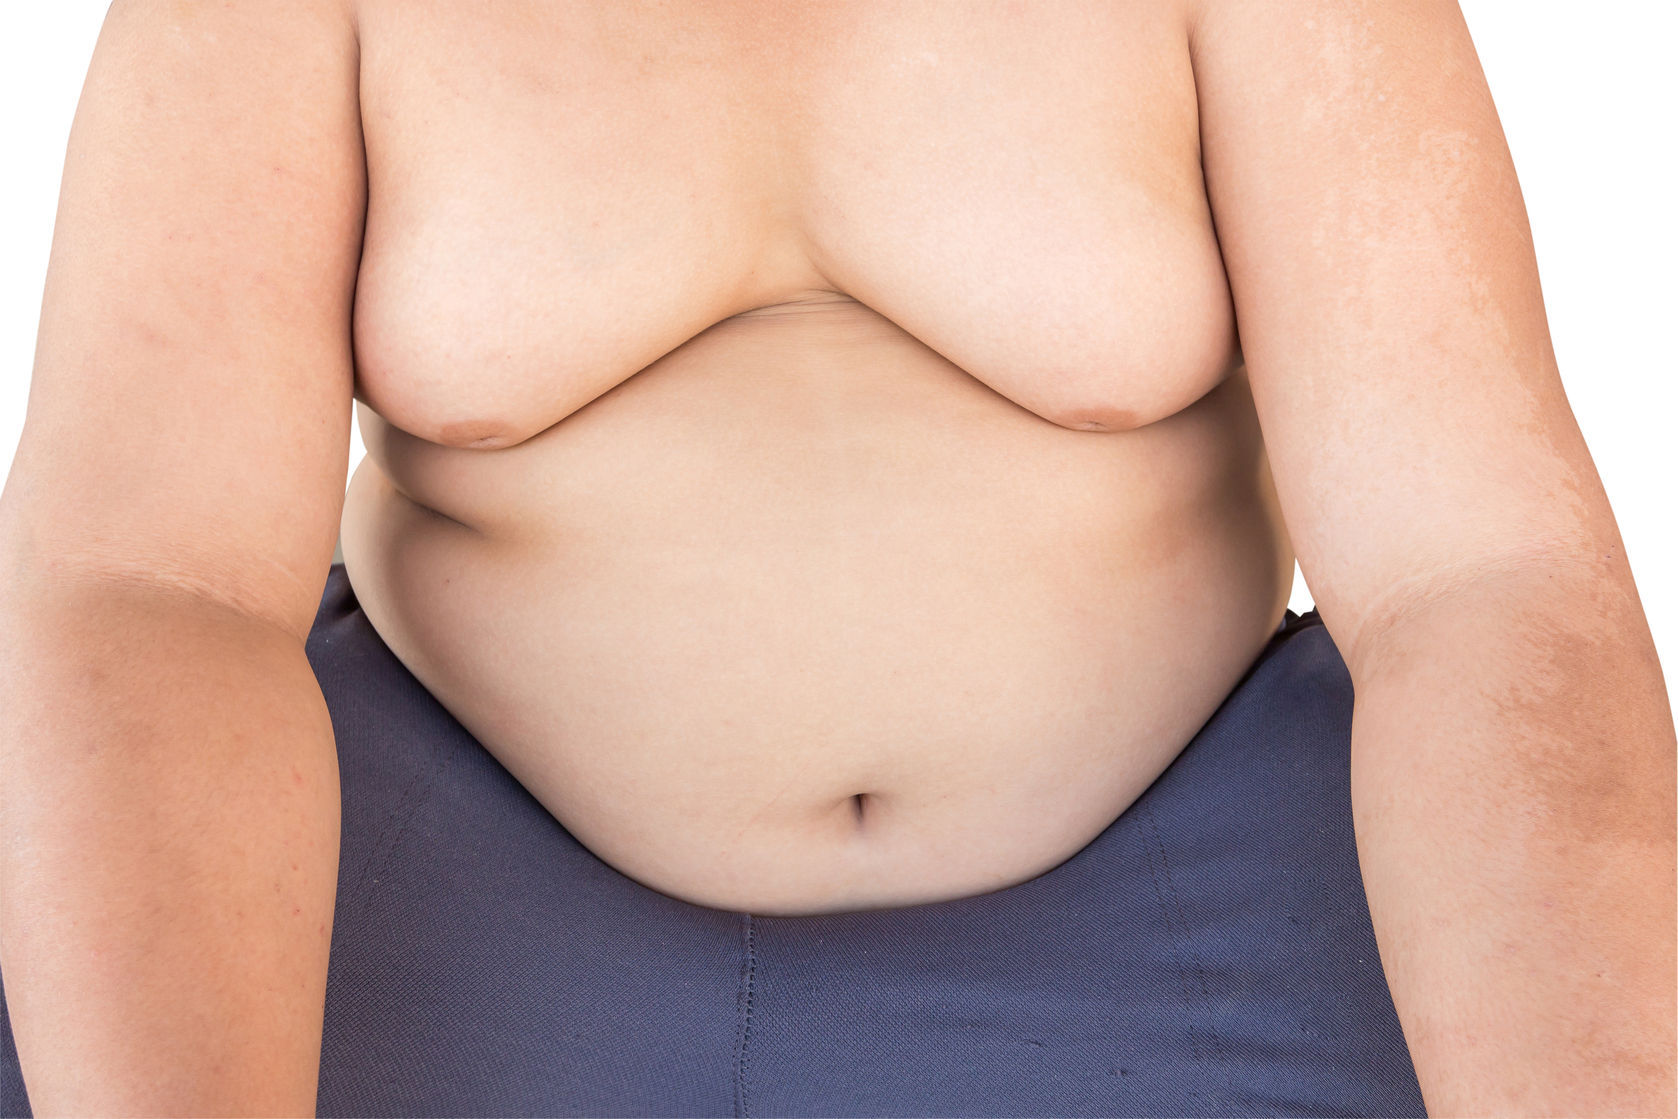 Prader Willi Syndrome or one of the causes of obesity in children